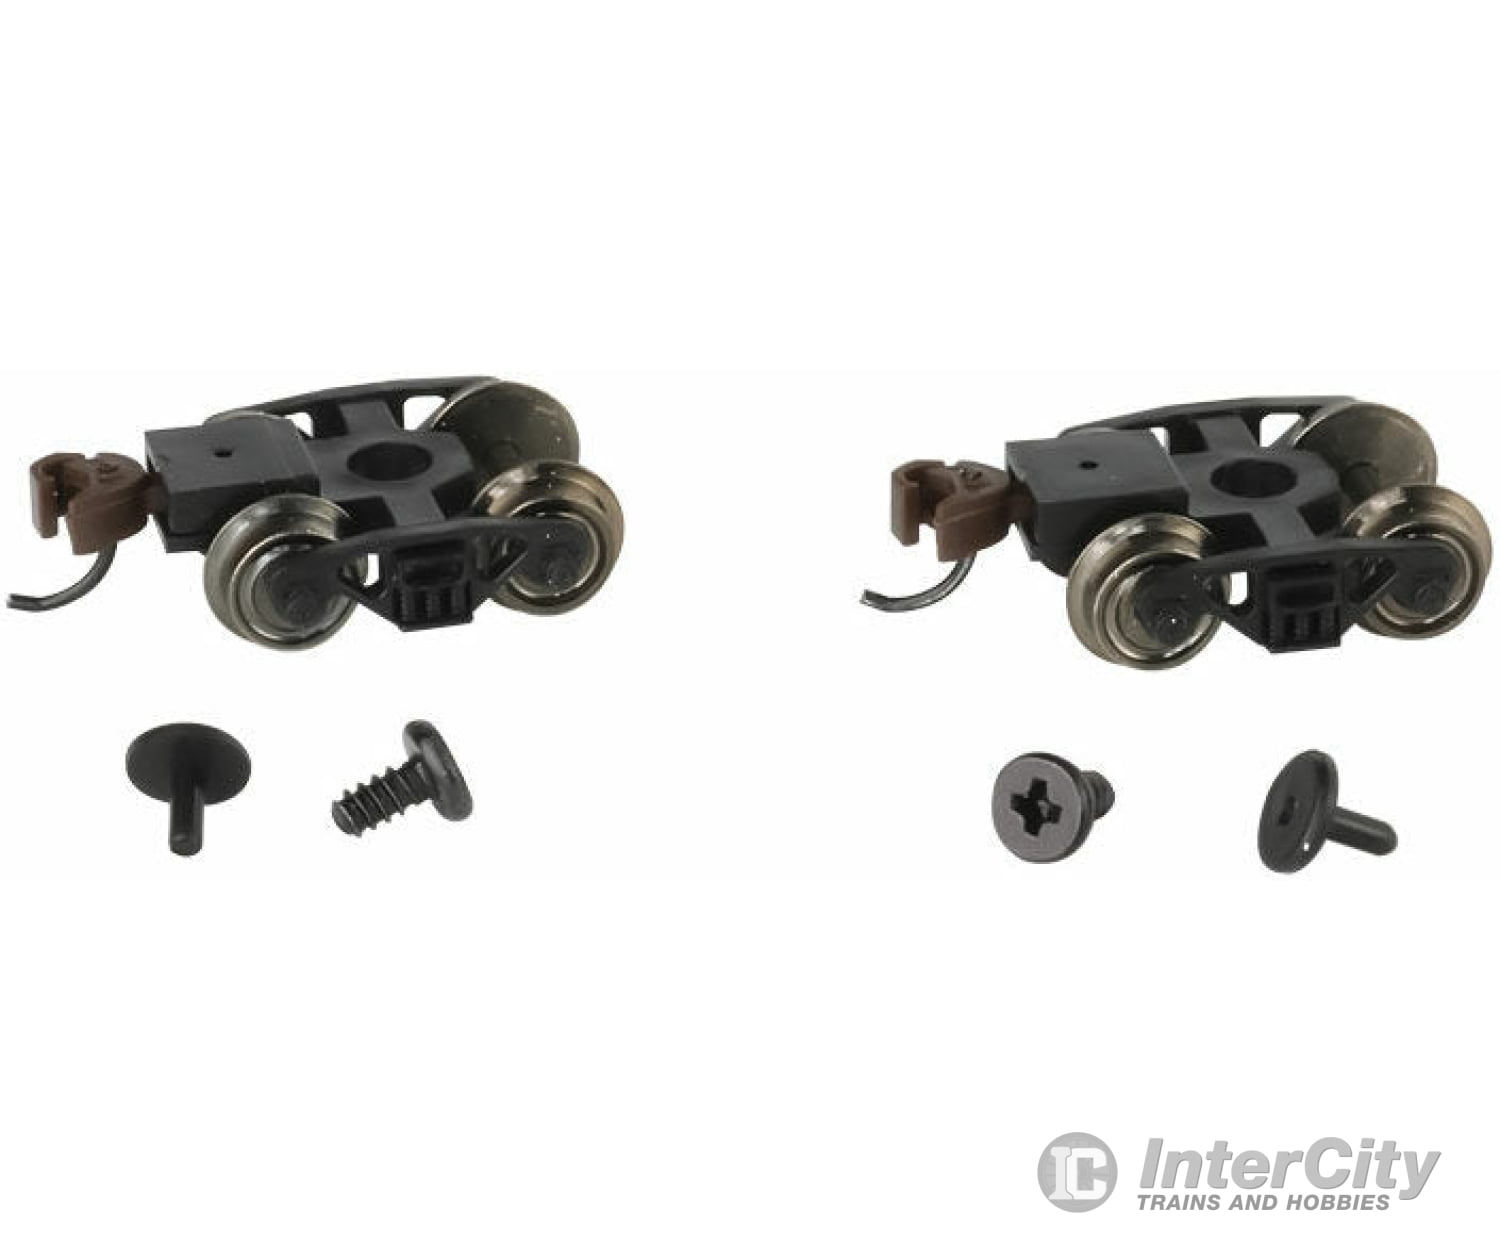 Bachmann 42537 Roller-Bearing Freight Trucks With Wheels And E-Z Mate(R) Knuckle Couplers -- 1 Pair